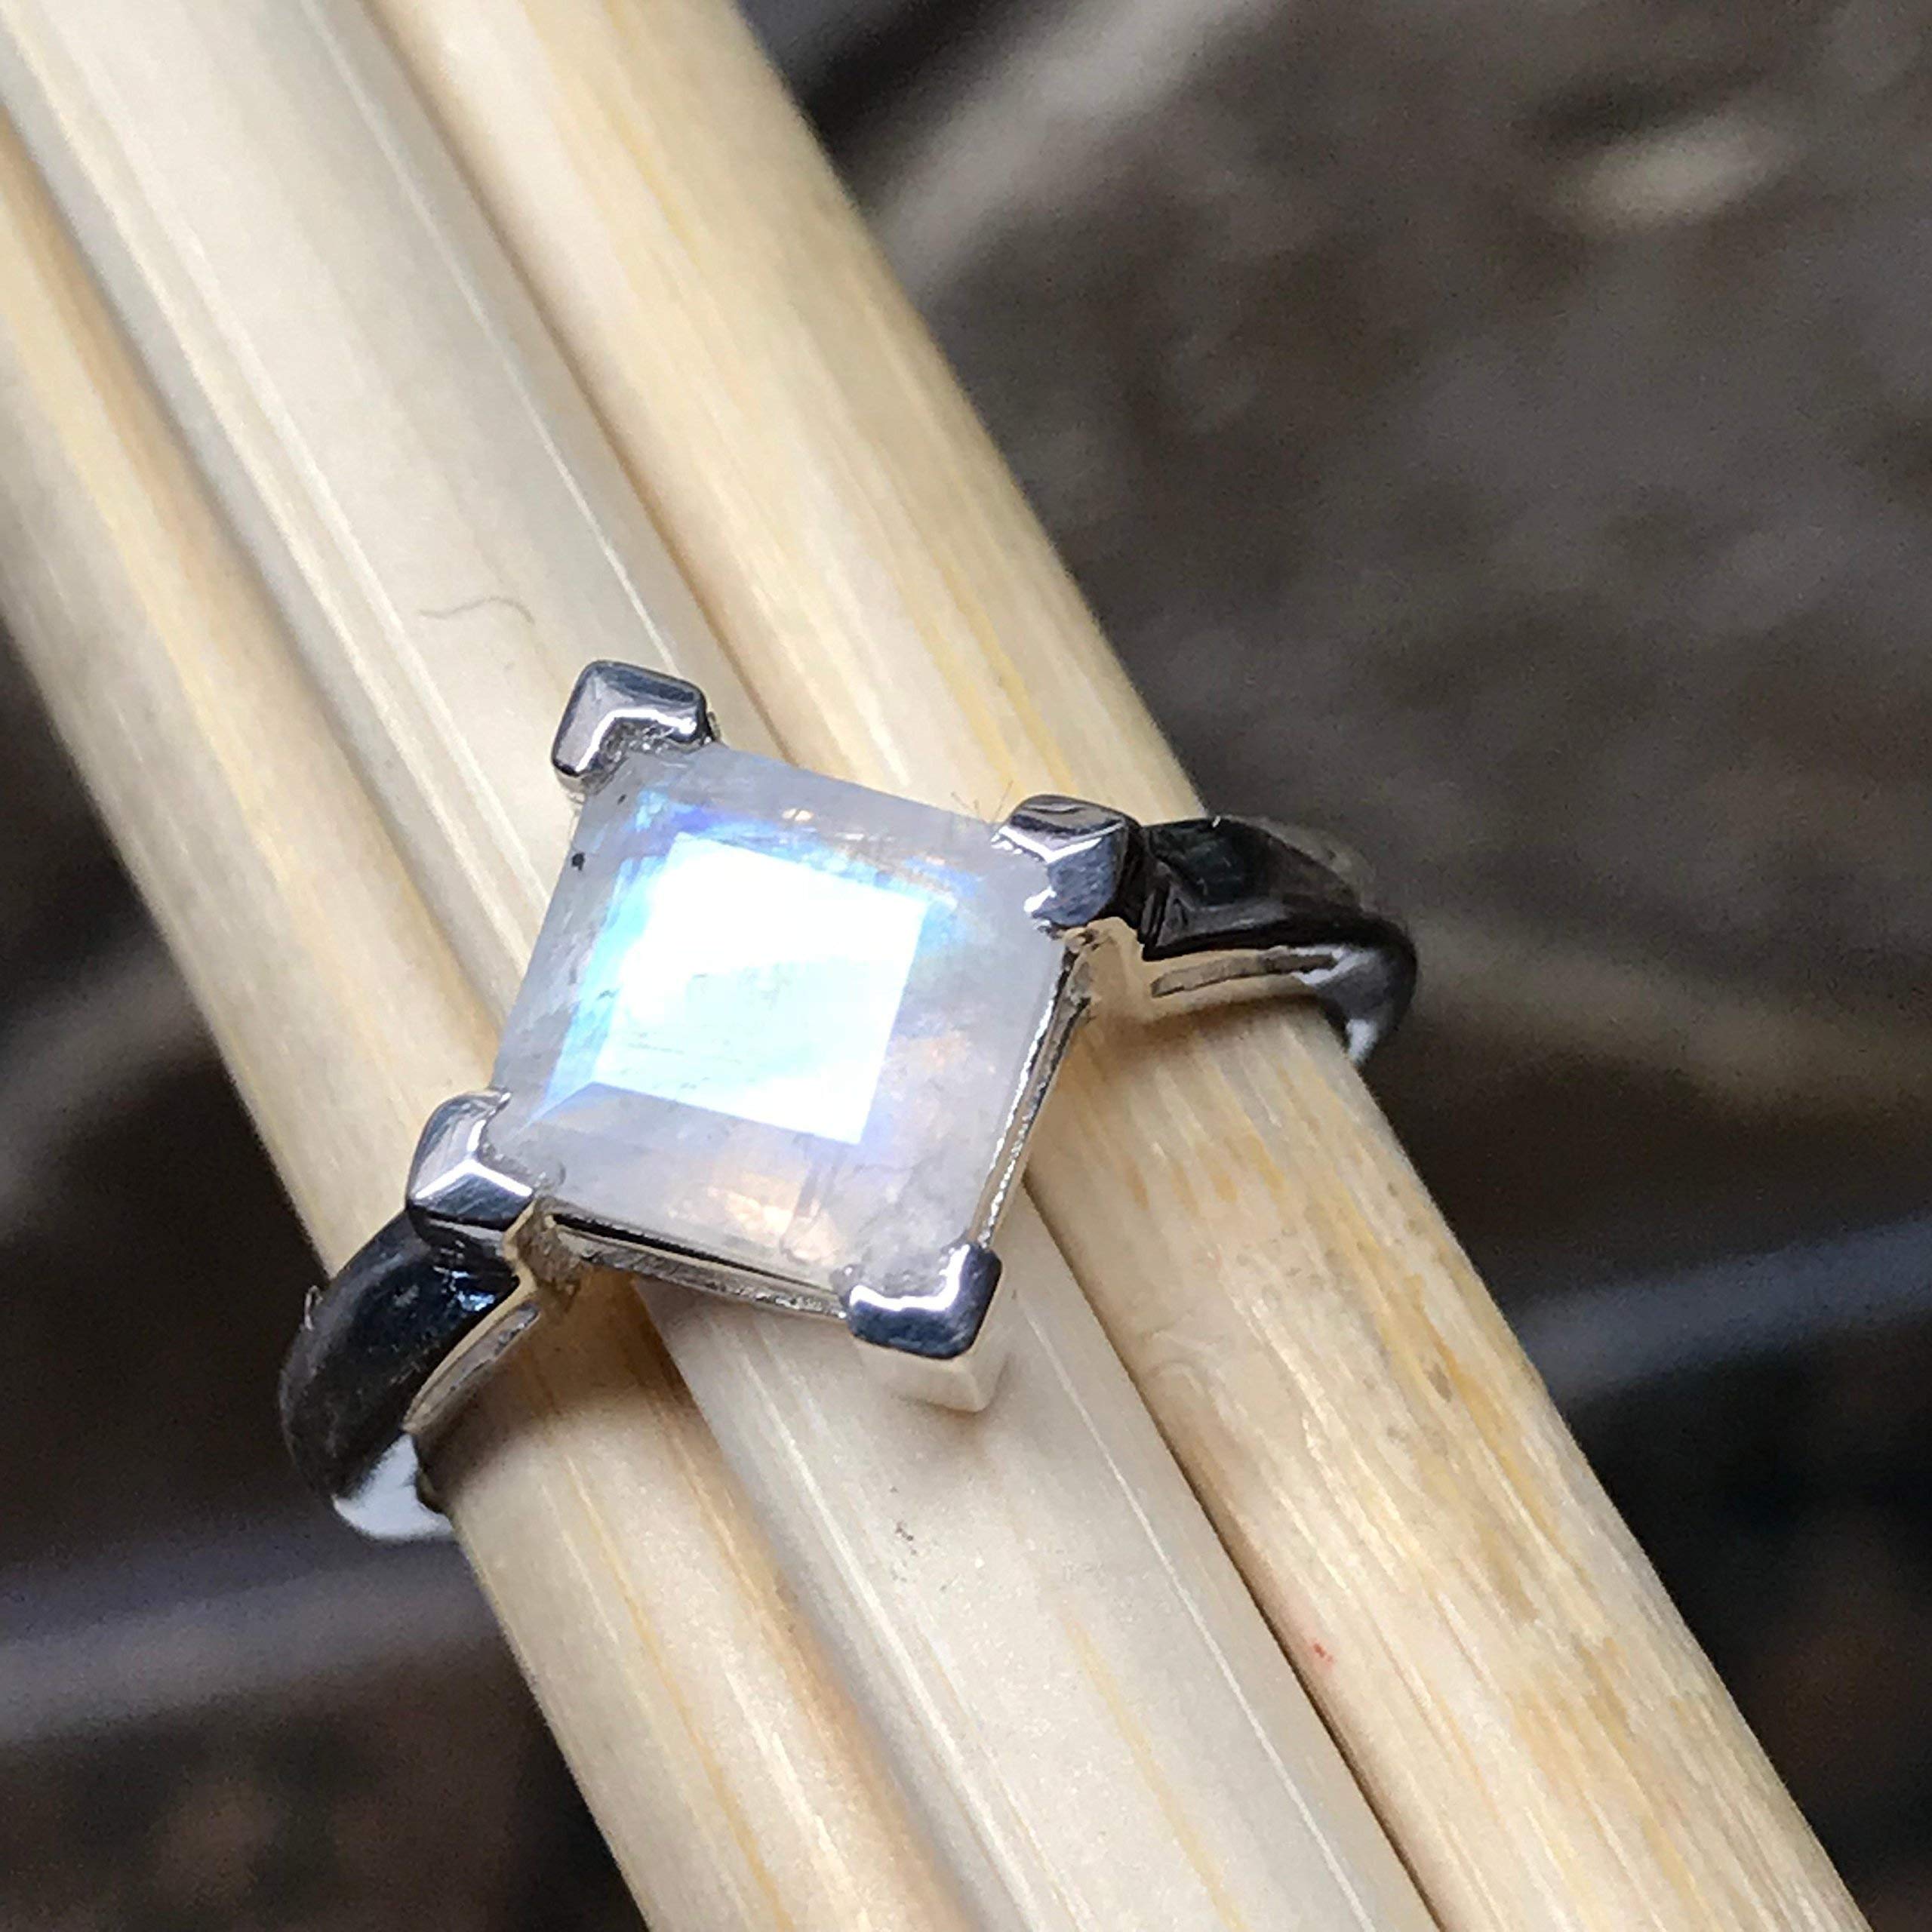 Genuine Rainbow Moonstone 925 Solid Sterling Silver Ring Size 5.25, 6, 7, 8, 9 - Natural Rocks by Kala